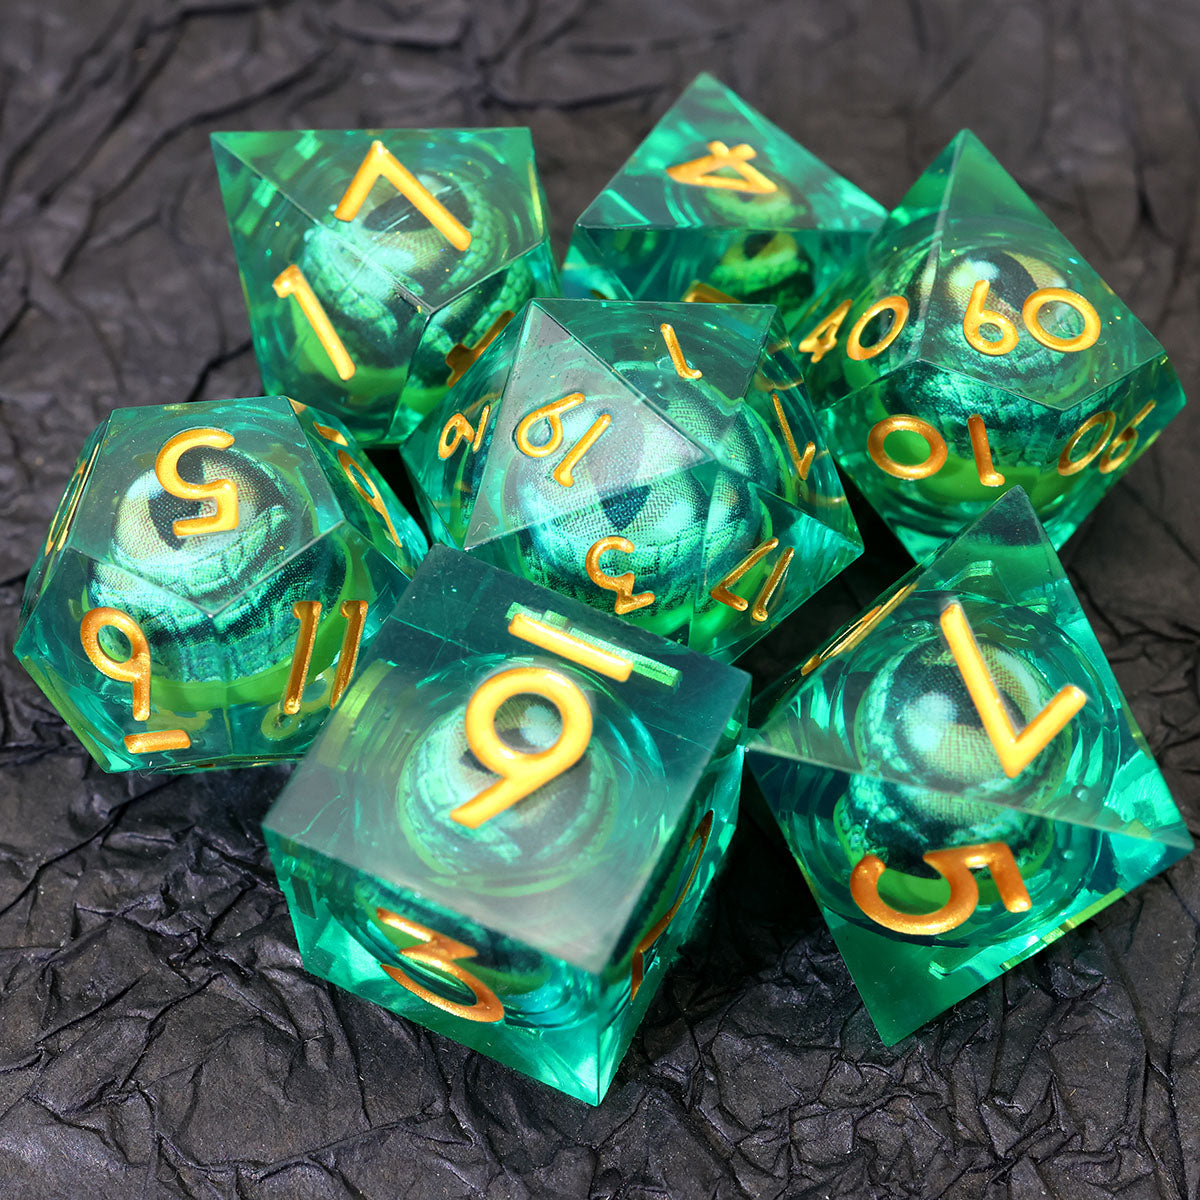 dragon eye dnd dice sets, TTRPG, role playing games and dice goblin, critical critter collectors